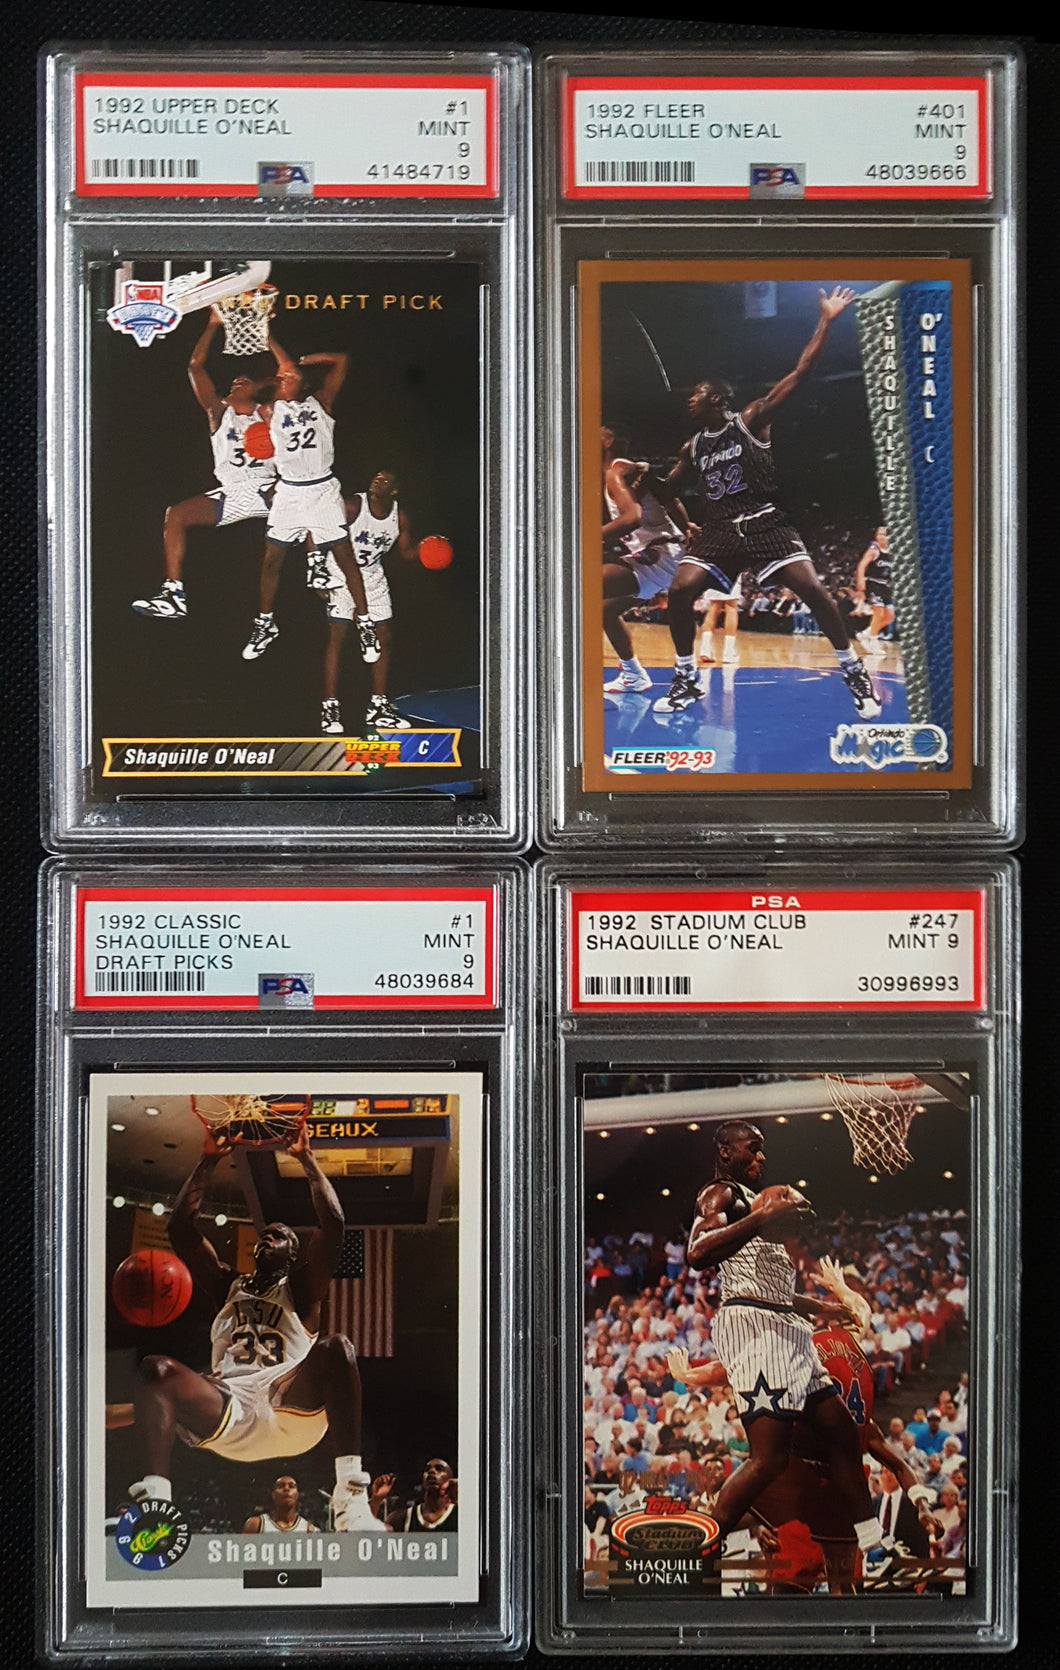 1992 Shaquille O'neal Rookie RC PSA graded card lot of (4) - Upper Deck, Fleer, Classic, Stadium Club